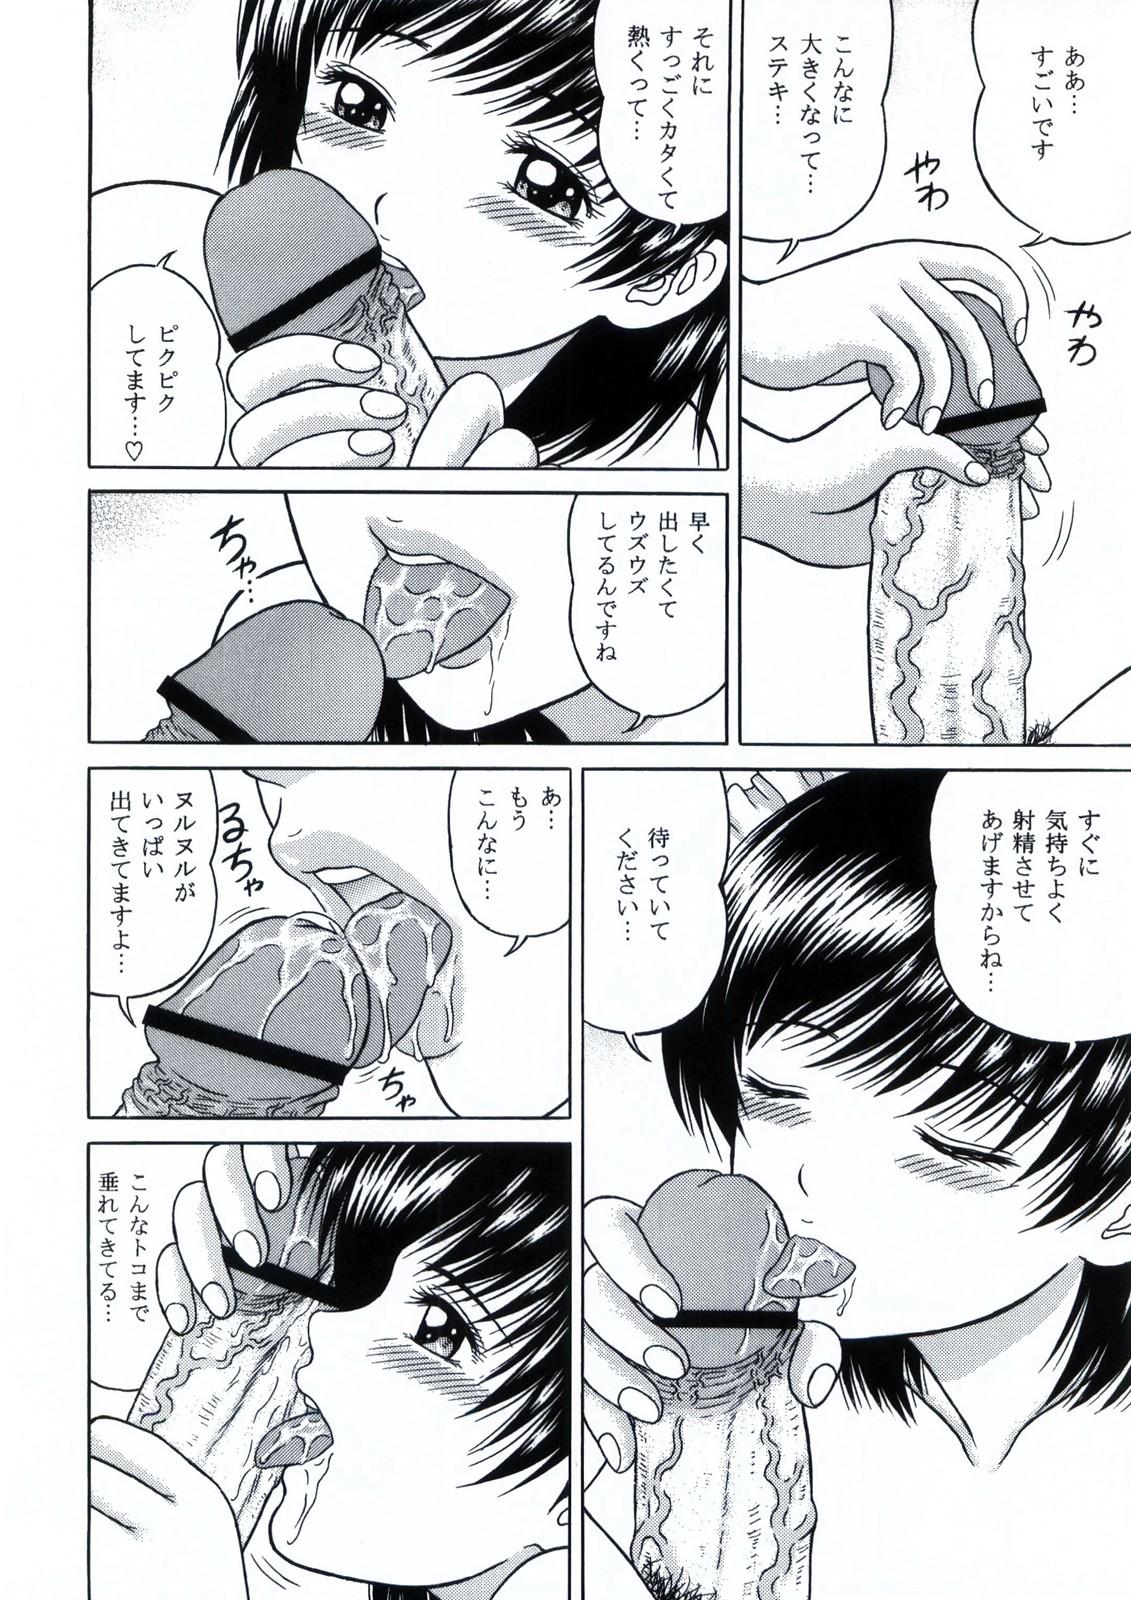 Sesso ANGEL SMILE VOLUME:0 Riding - Page 6